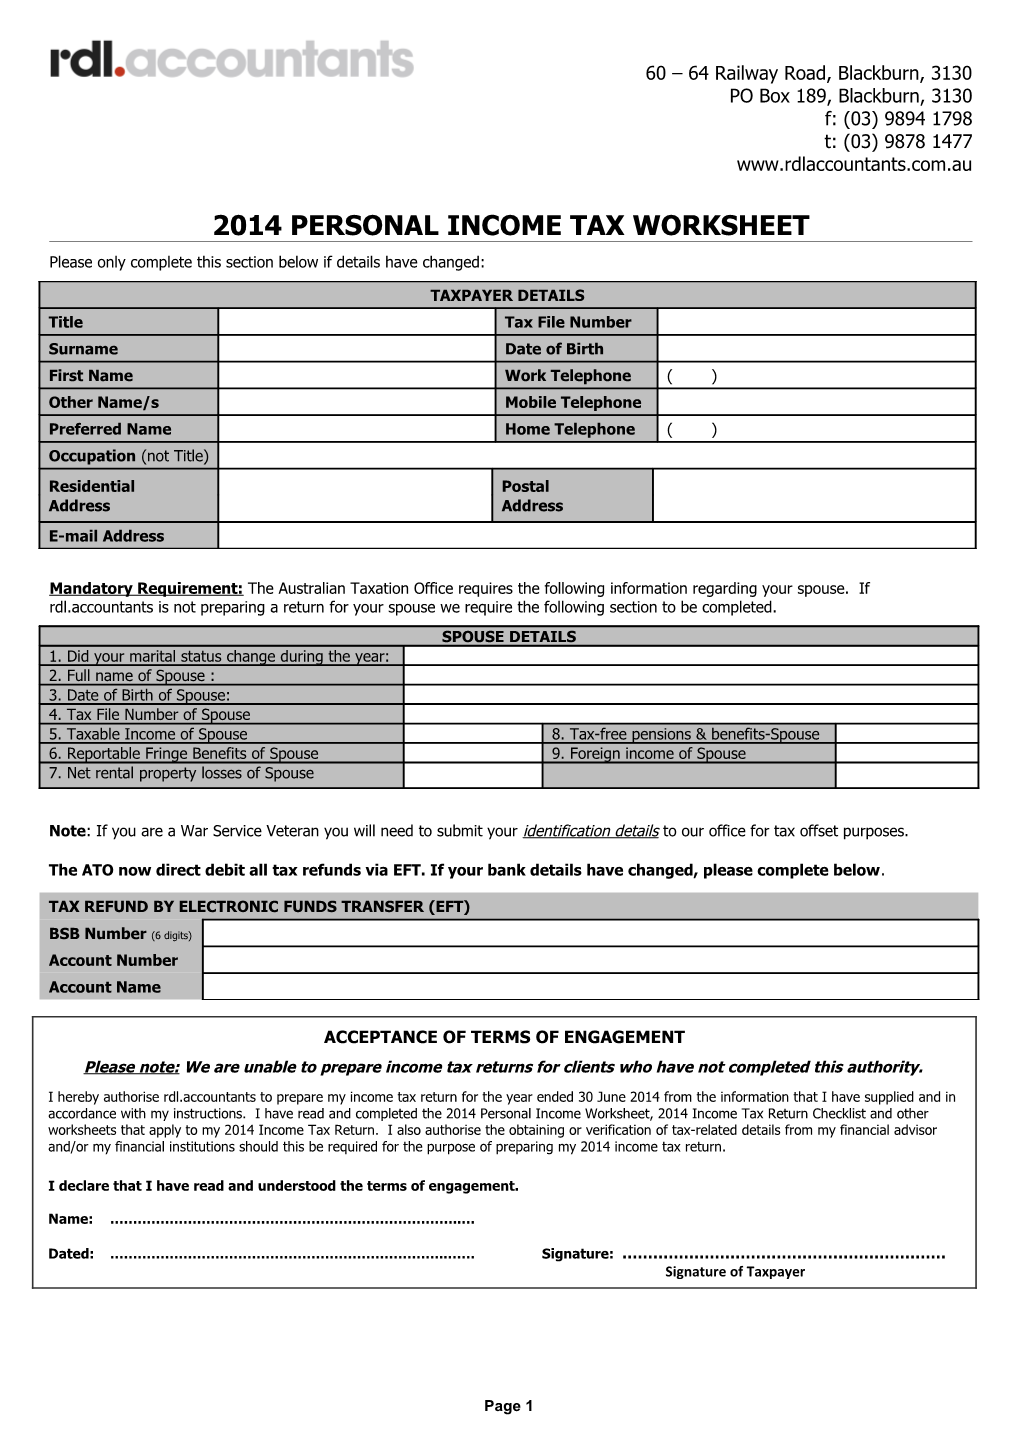 Personal Income Tax Worksheet 2003